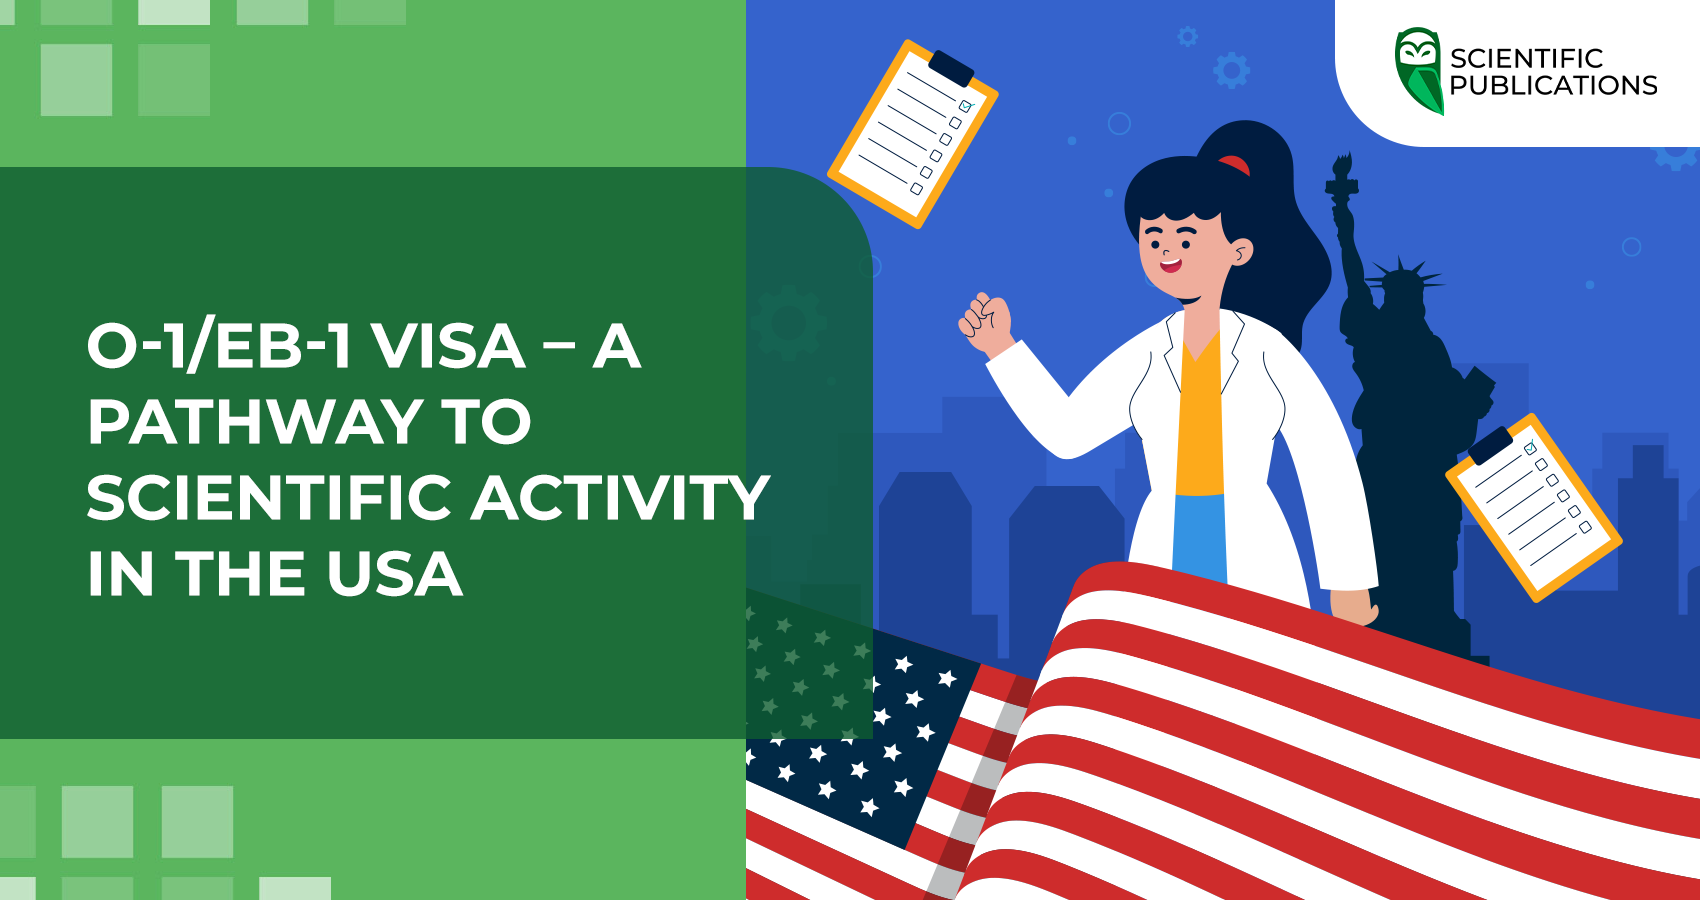 O-1/EB-1 visa – a pathway to scientific activity in the USA